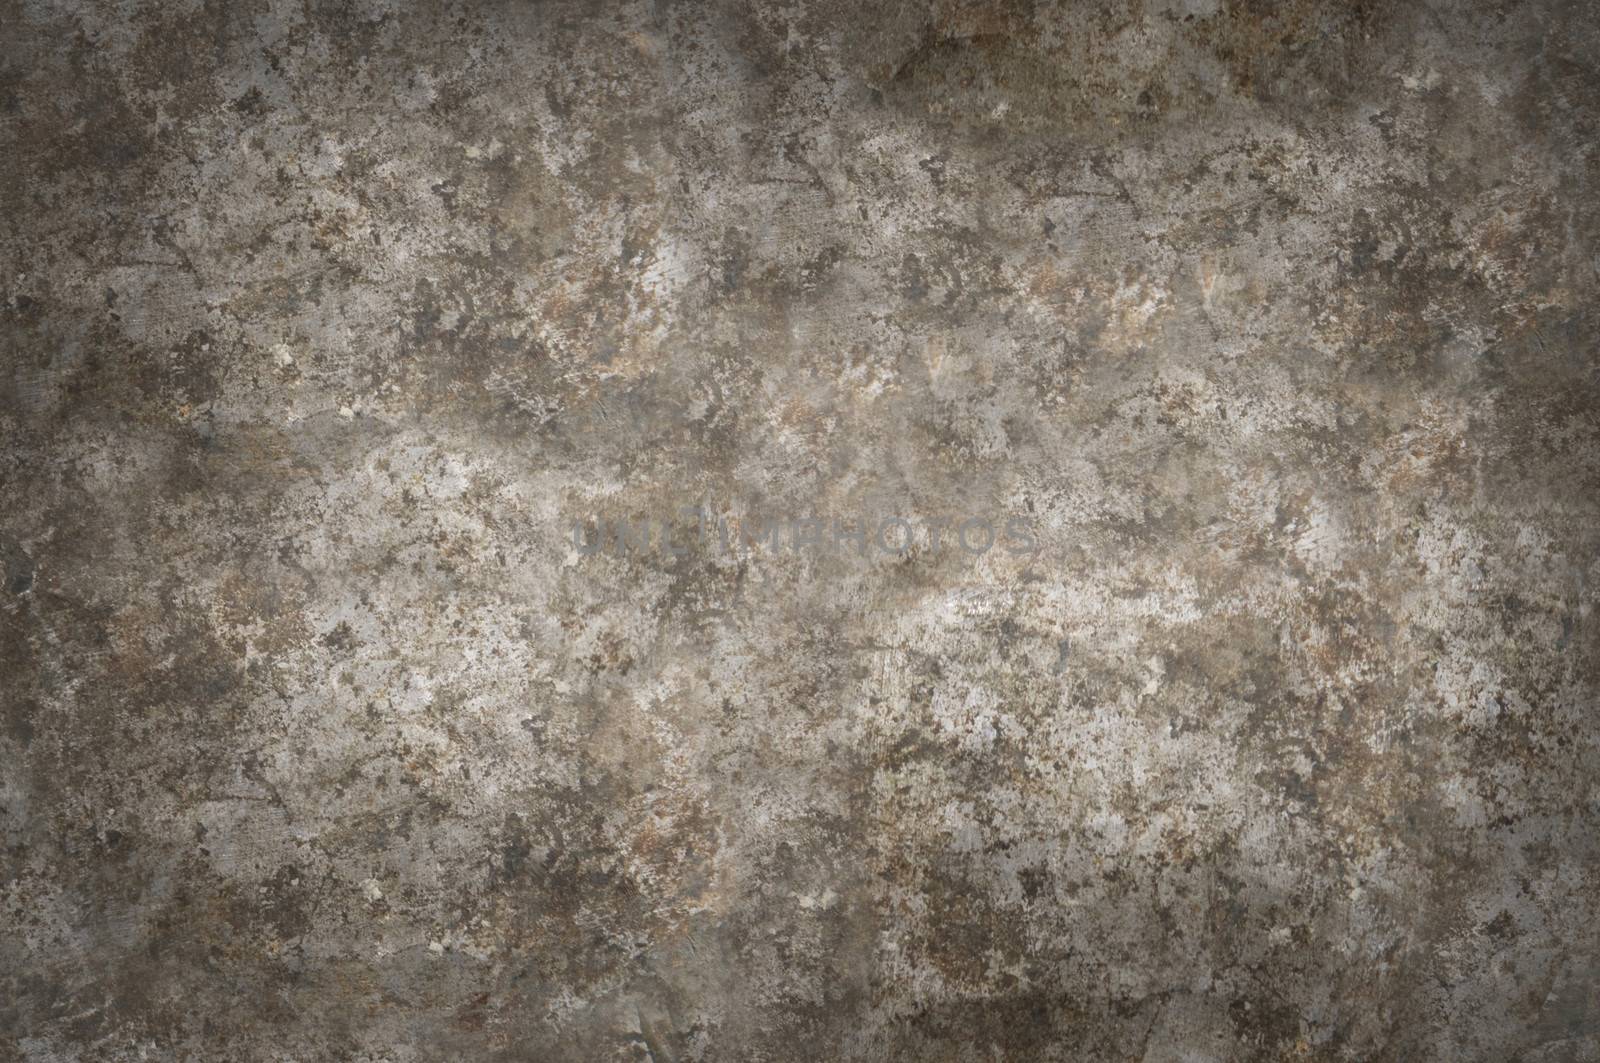 Distressed gray metal surface texture